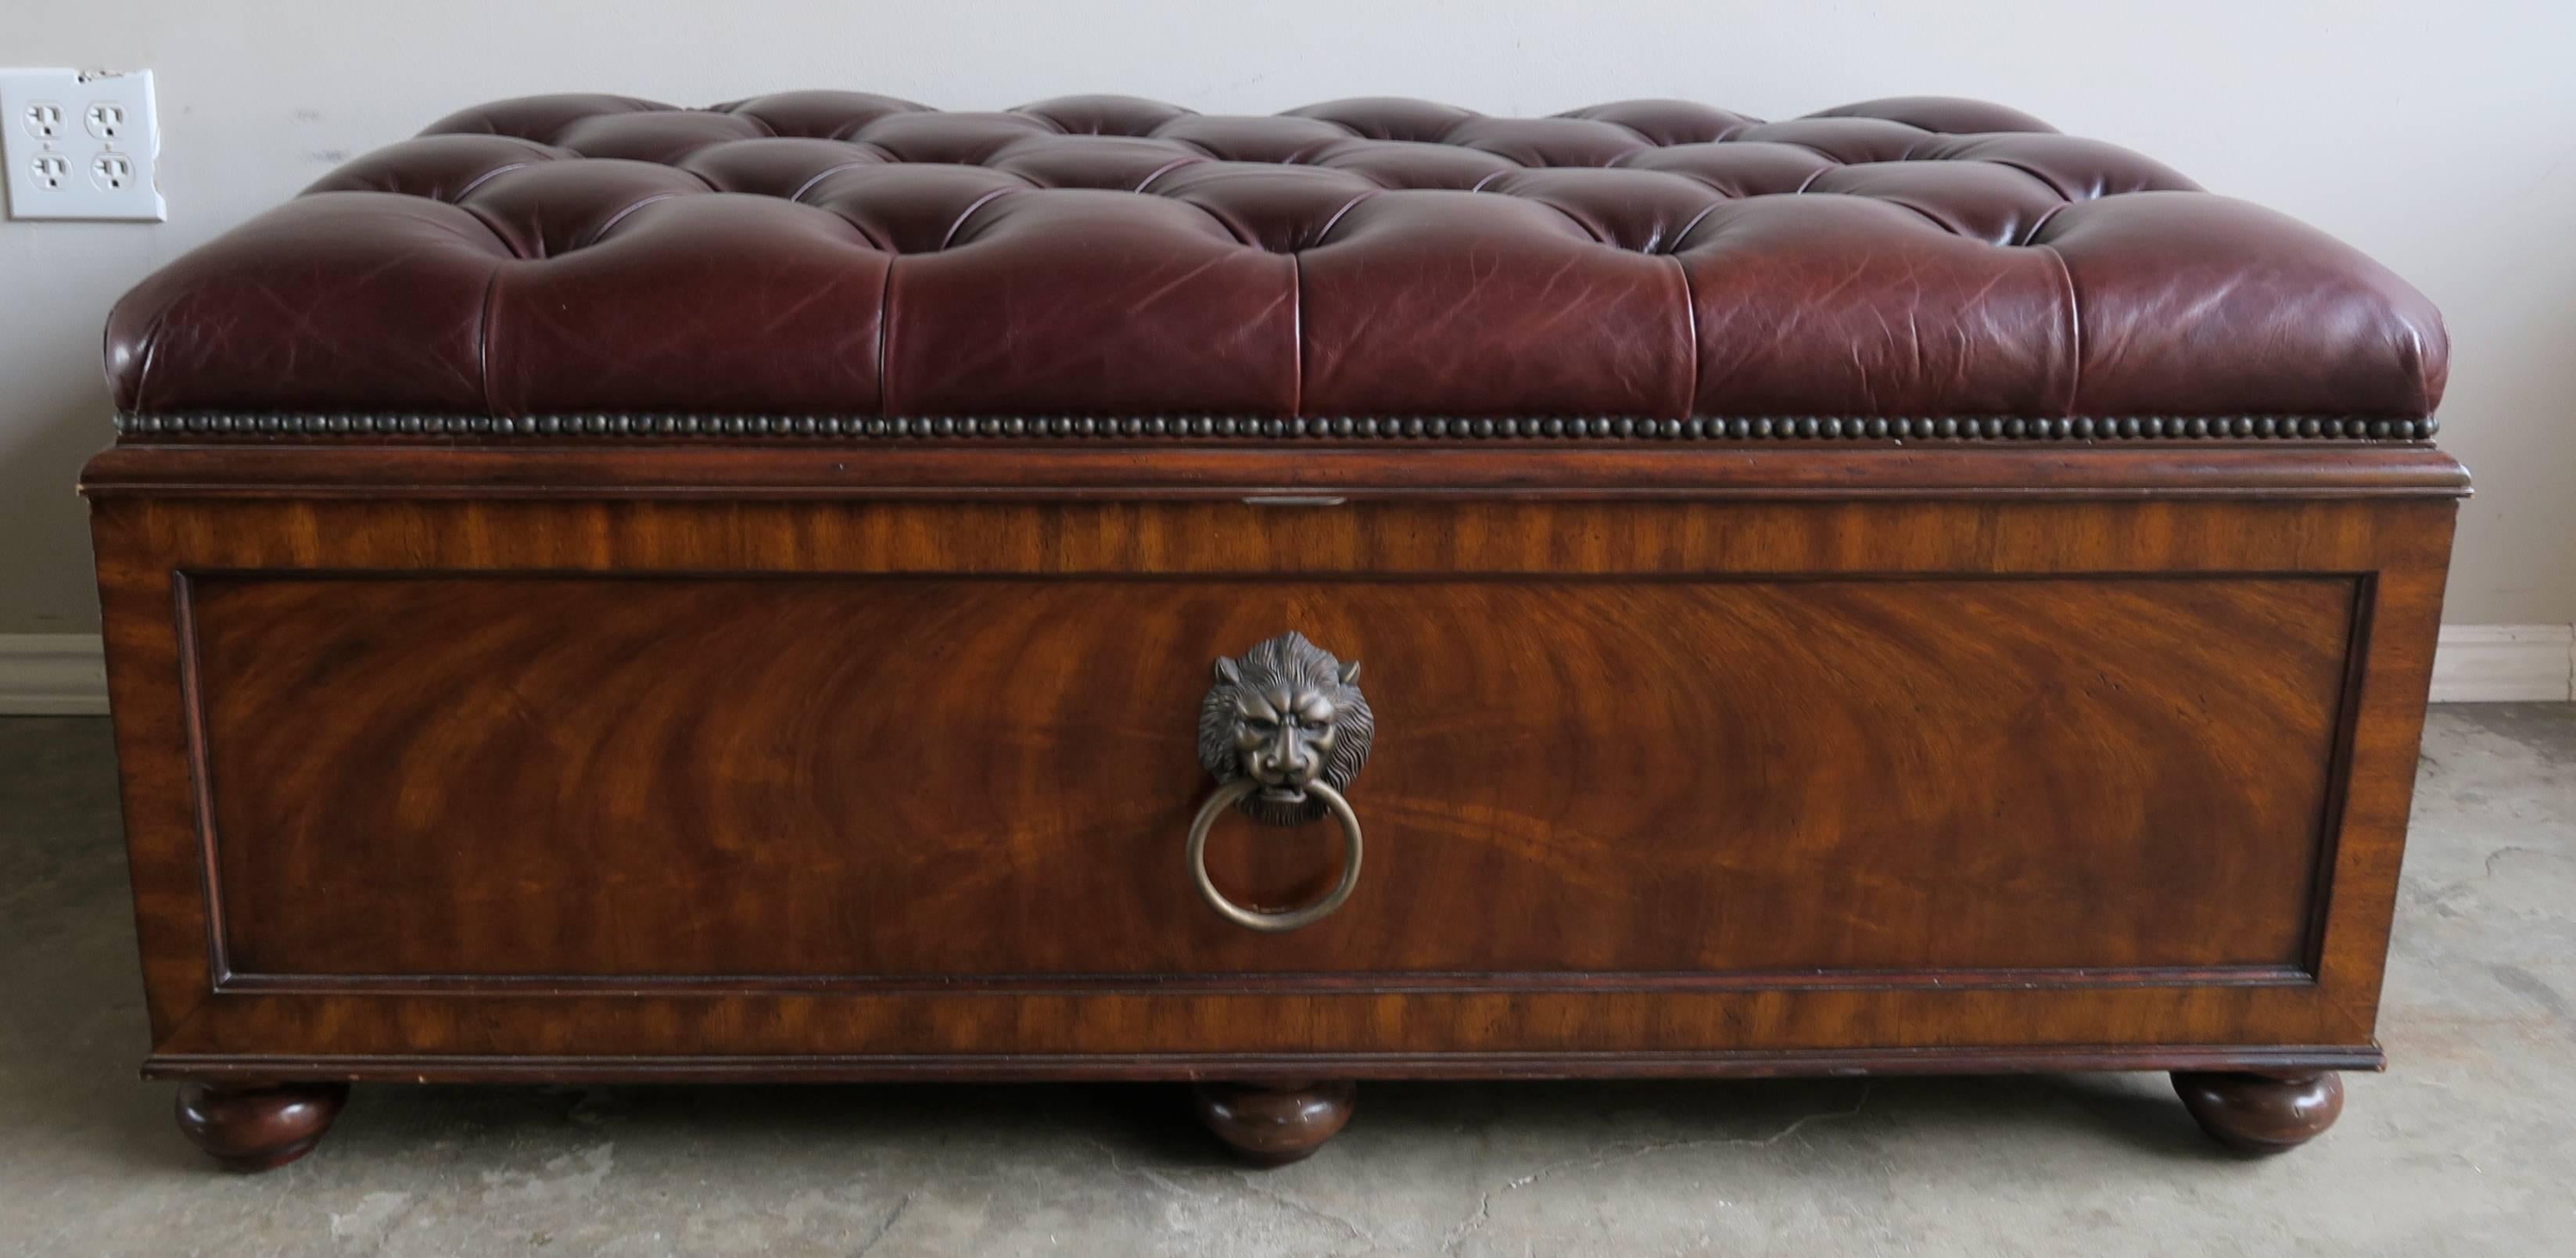 English flamed mahogany leather tufted trunk with brass hardware and nailhead trim detail. The chest opens to expose large storage area inside.